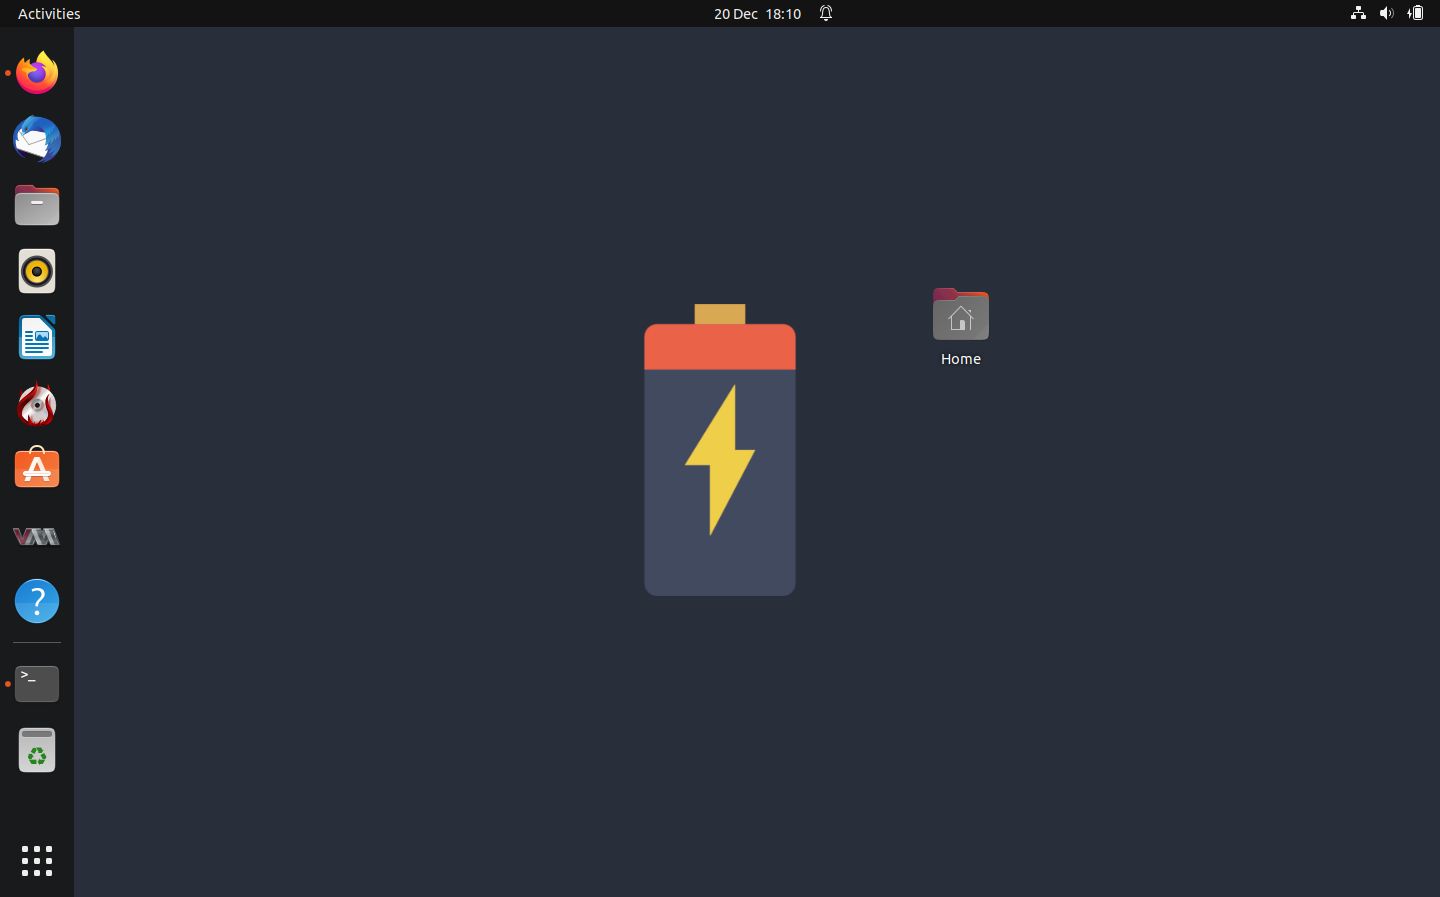 ubuntu with a wallpaper showing a charging battery